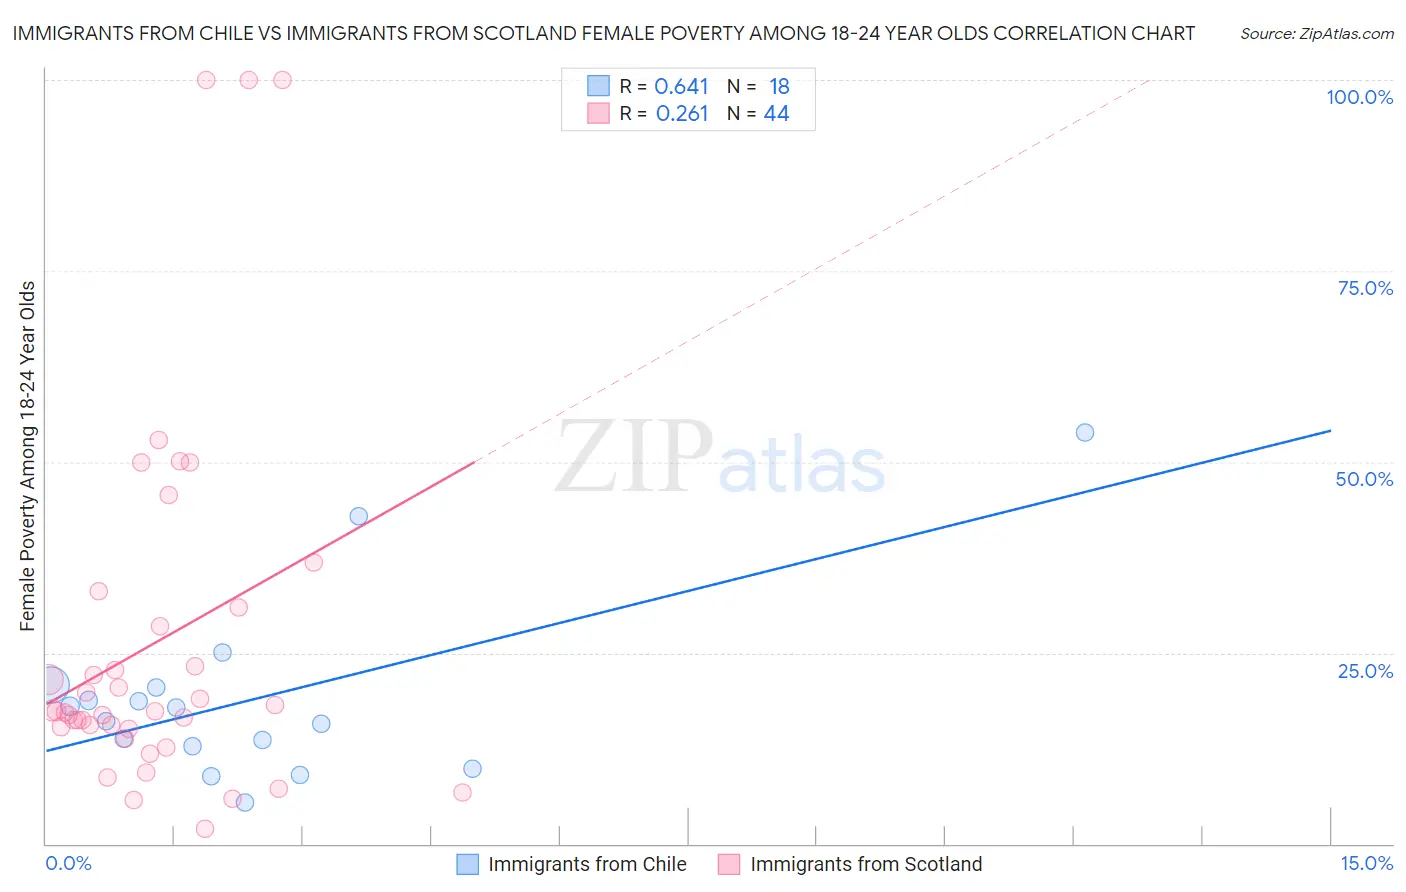 Immigrants from Chile vs Immigrants from Scotland Female Poverty Among 18-24 Year Olds